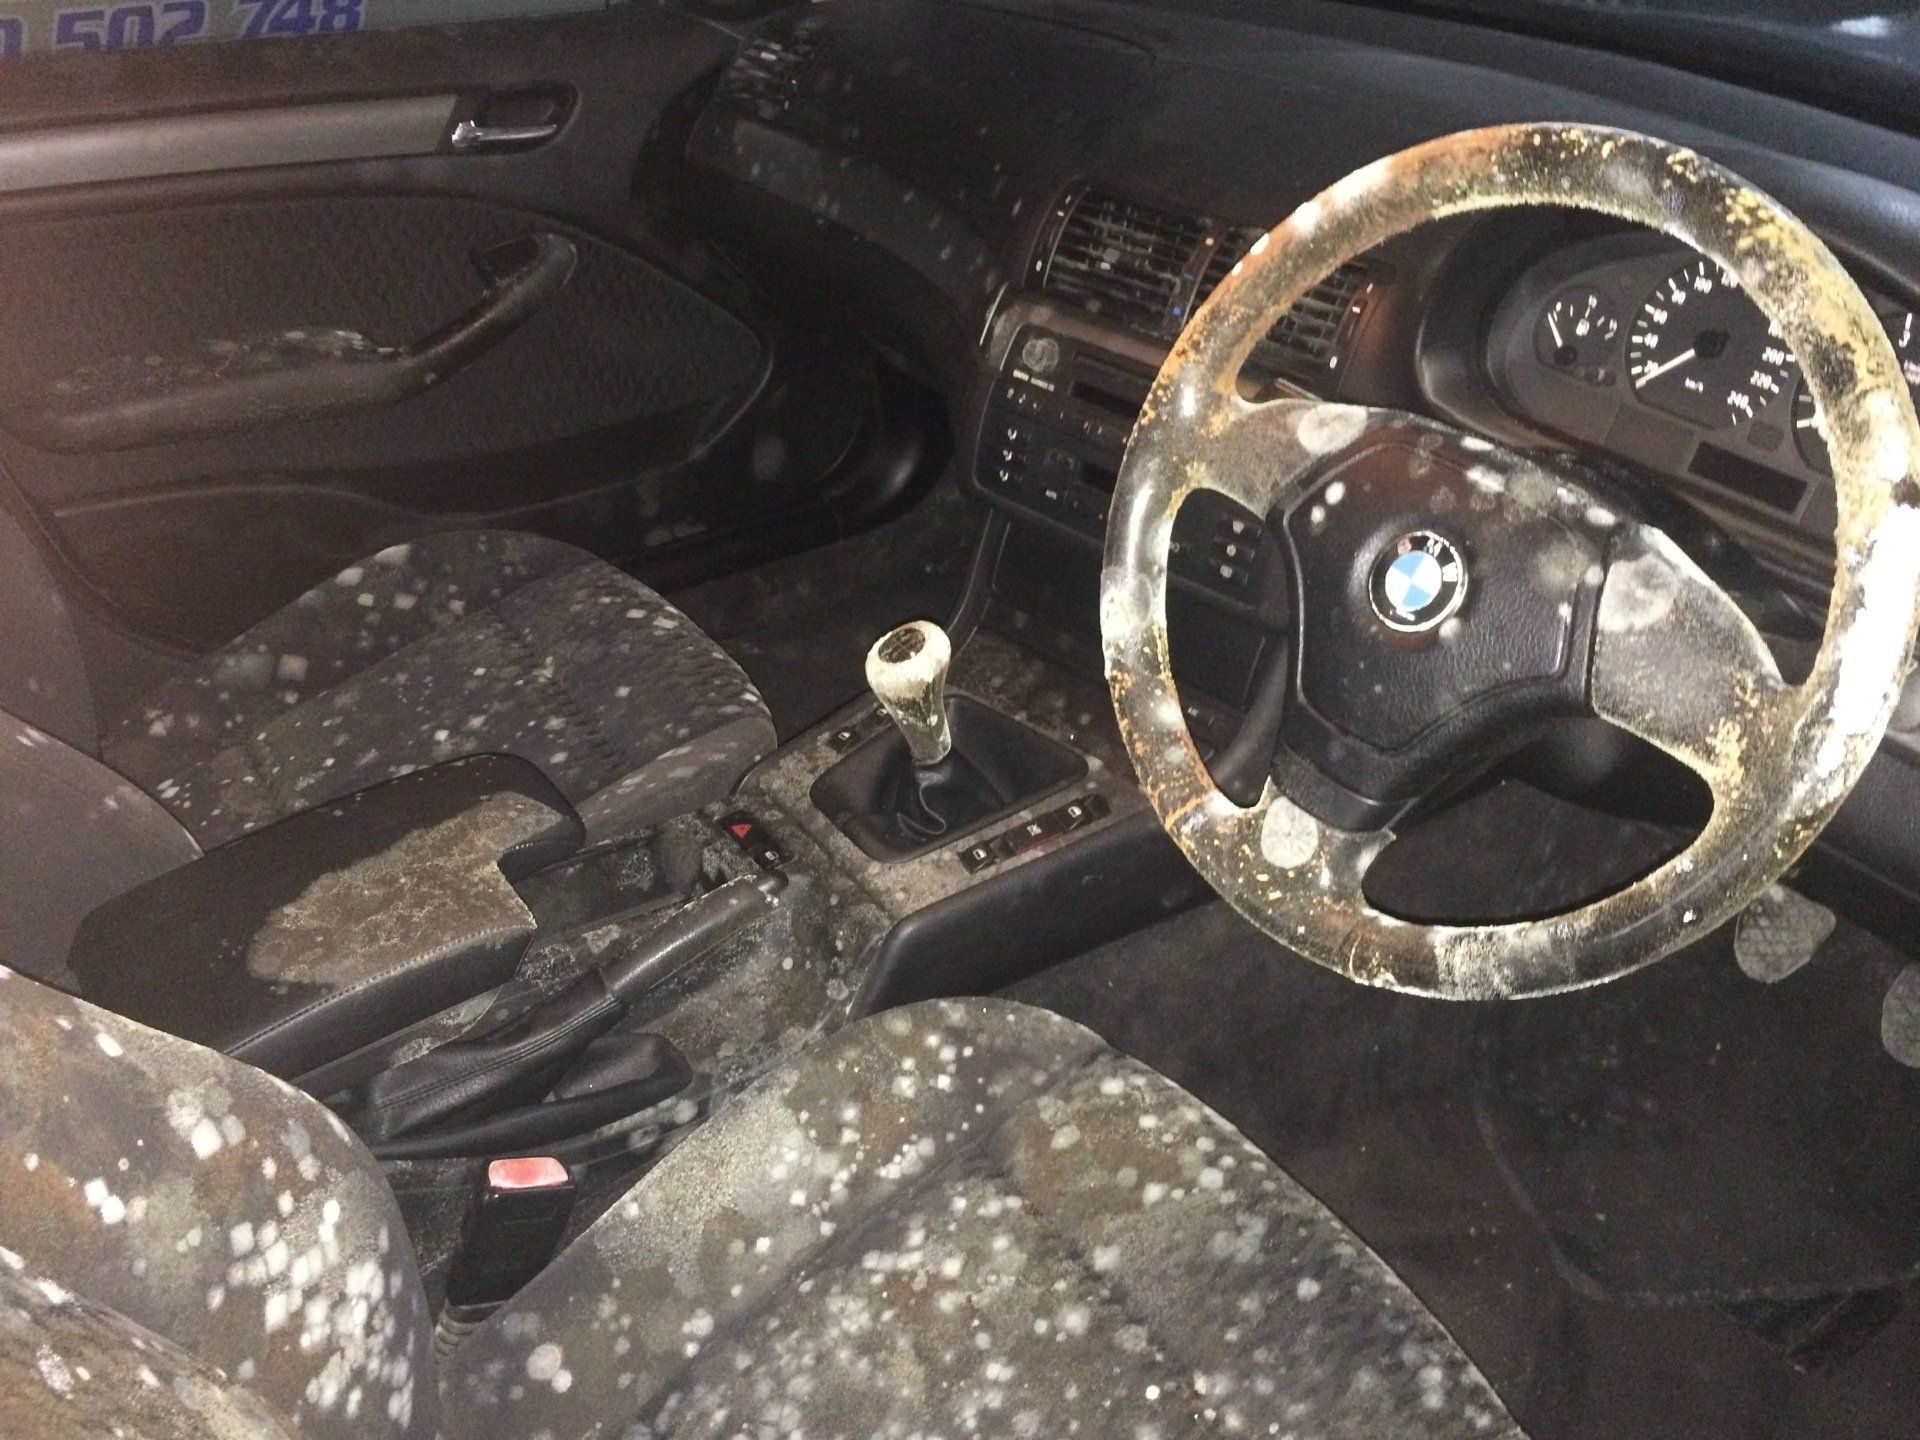 The inside of a car covered in mould